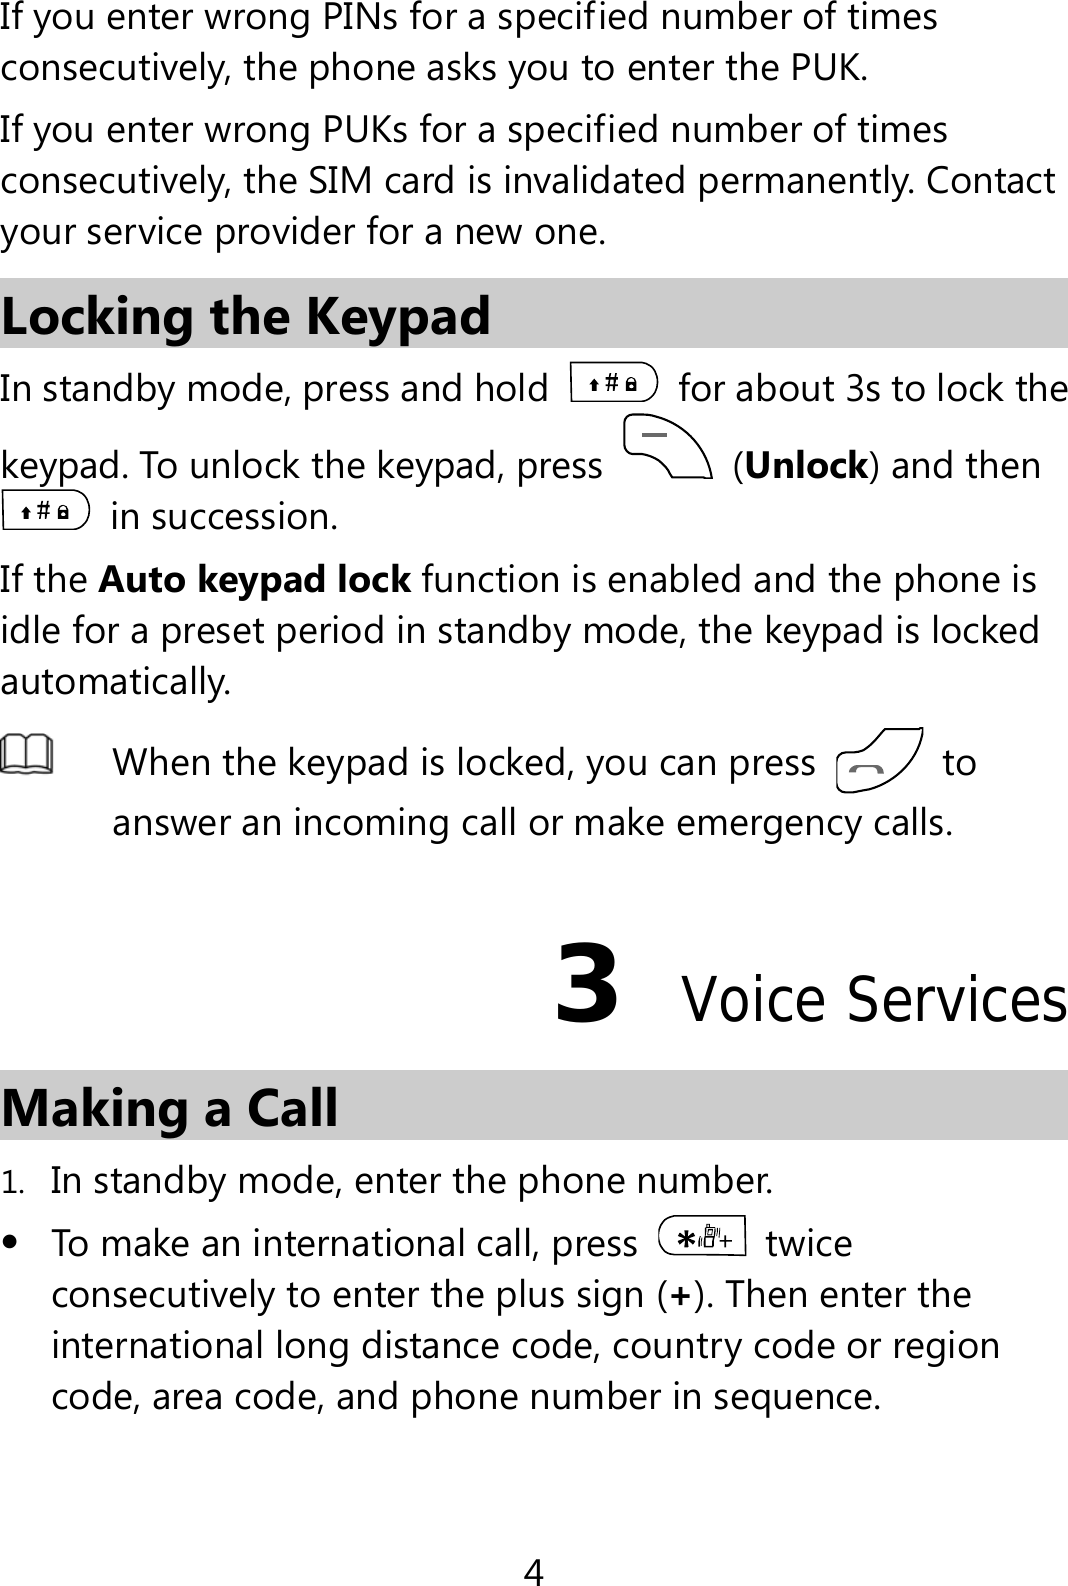 4 If you enter wrong PINs for a specified number of times consecutively, the phone asks you to enter the PUK. If you enter wrong PUKs for a specified number of times consecutively, the SIM card is invalidated permanently. Contact your service provider for a new one. Locking the Keypad In standby mode, press and hold    for about 3s to lock the keypad. To unlock the keypad, press   (Unlock) and then  in succession. If the Auto keypad lock function is enabled and the phone is idle for a preset period in standby mode, the keypad is locked automatically.  When the keypad is locked, you can press   to answer an incoming call or make emergency calls.3  Voice Services Making a Call 1. In standby mode, enter the phone number.  To make an international call, press   twice consecutively to enter the plus sign (+). Then enter the international long distance code, country code or region code, area code, and phone number in sequence. 